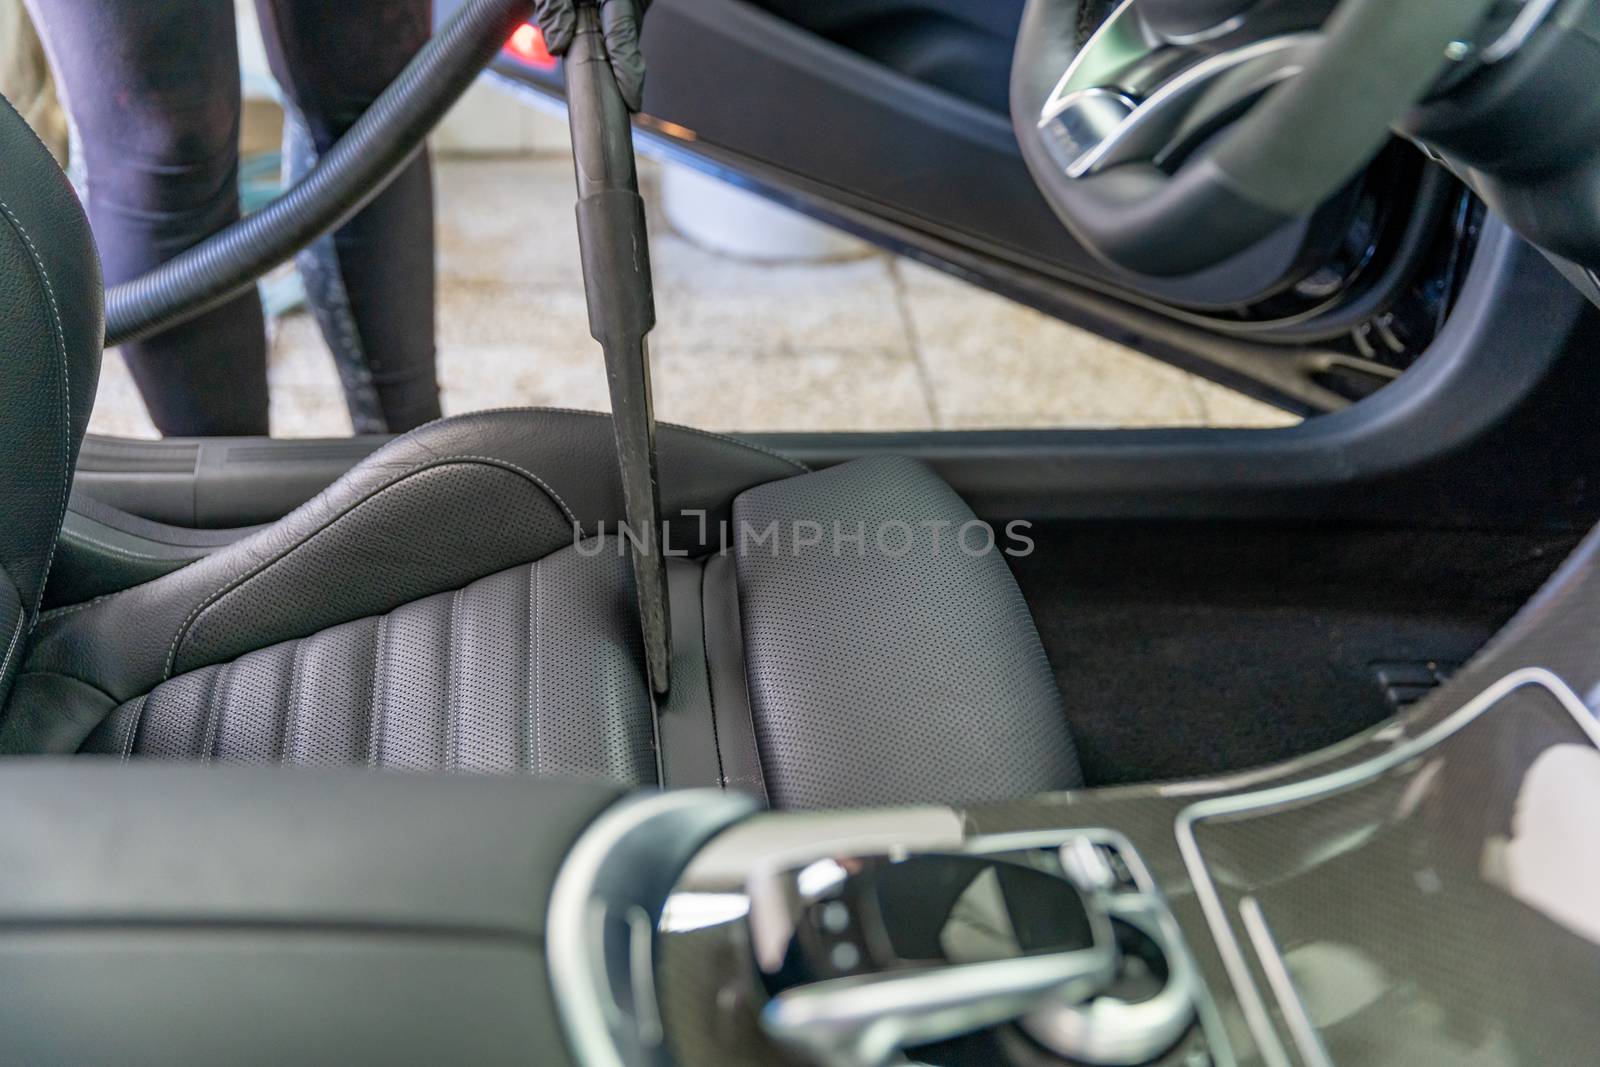 vacuuming the interior of a luxury car in the garage by Edophoto